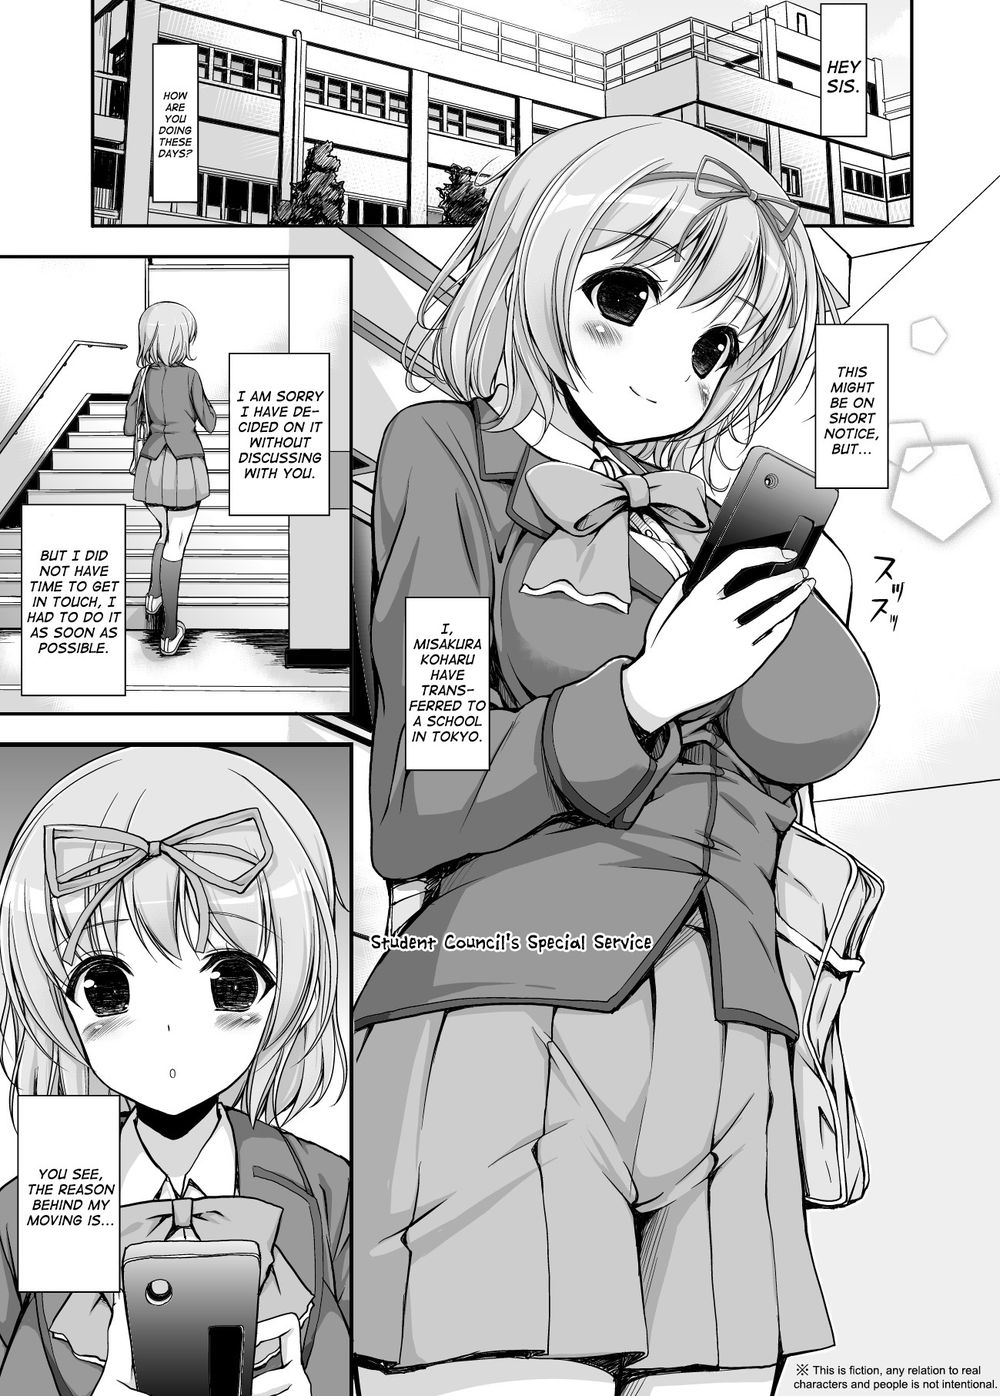 Hentai Manga Comic-Student Council's Special Service-Read-2